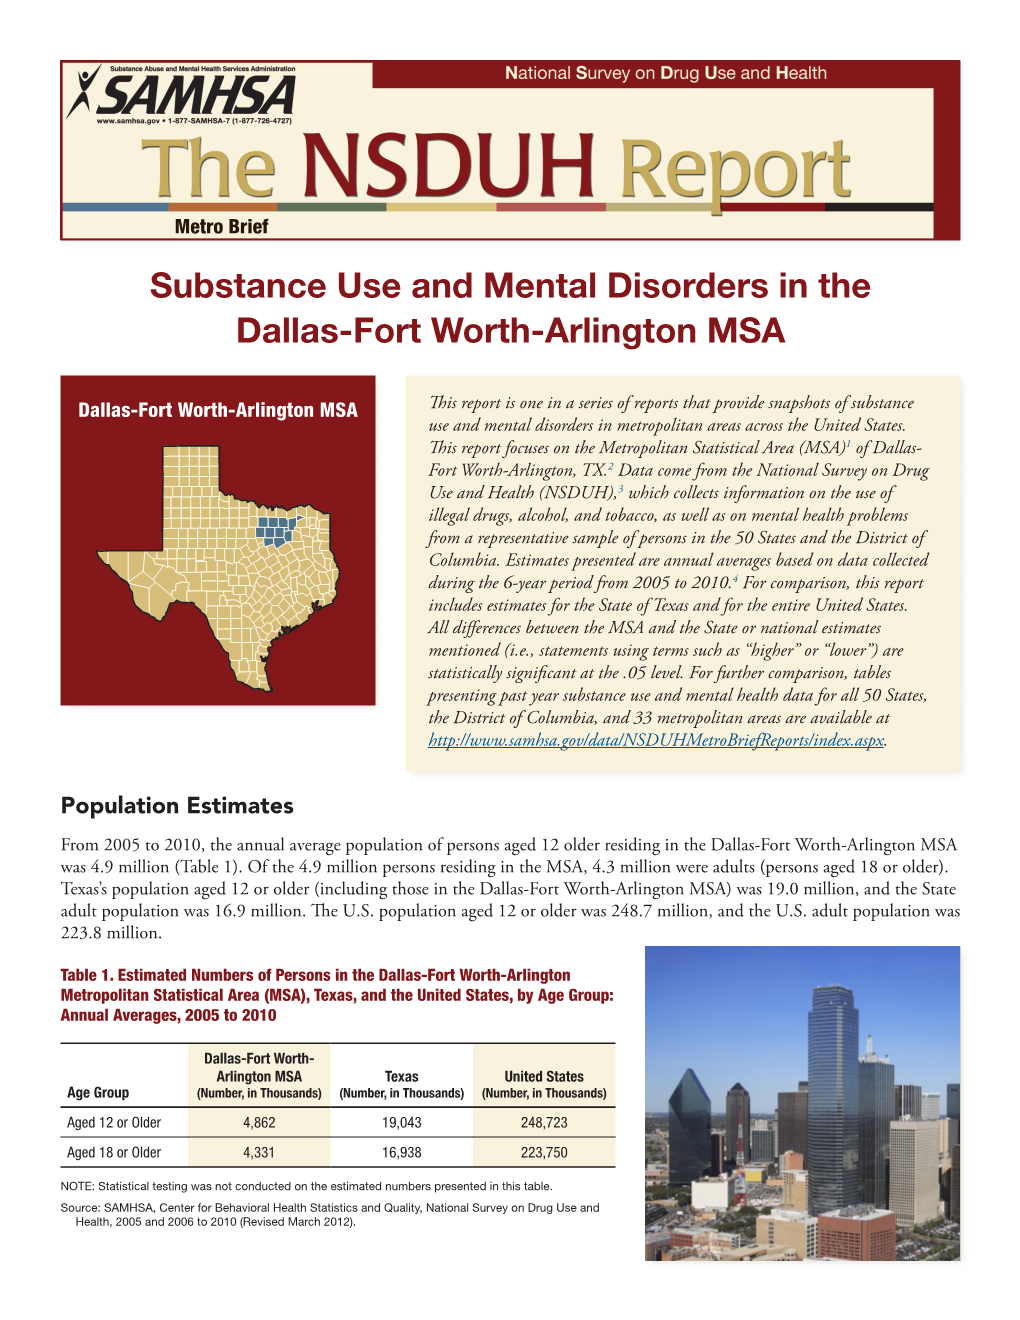 Substance Use and Mental Disorders in the Dallas-Fort Worth-Arlington MSA